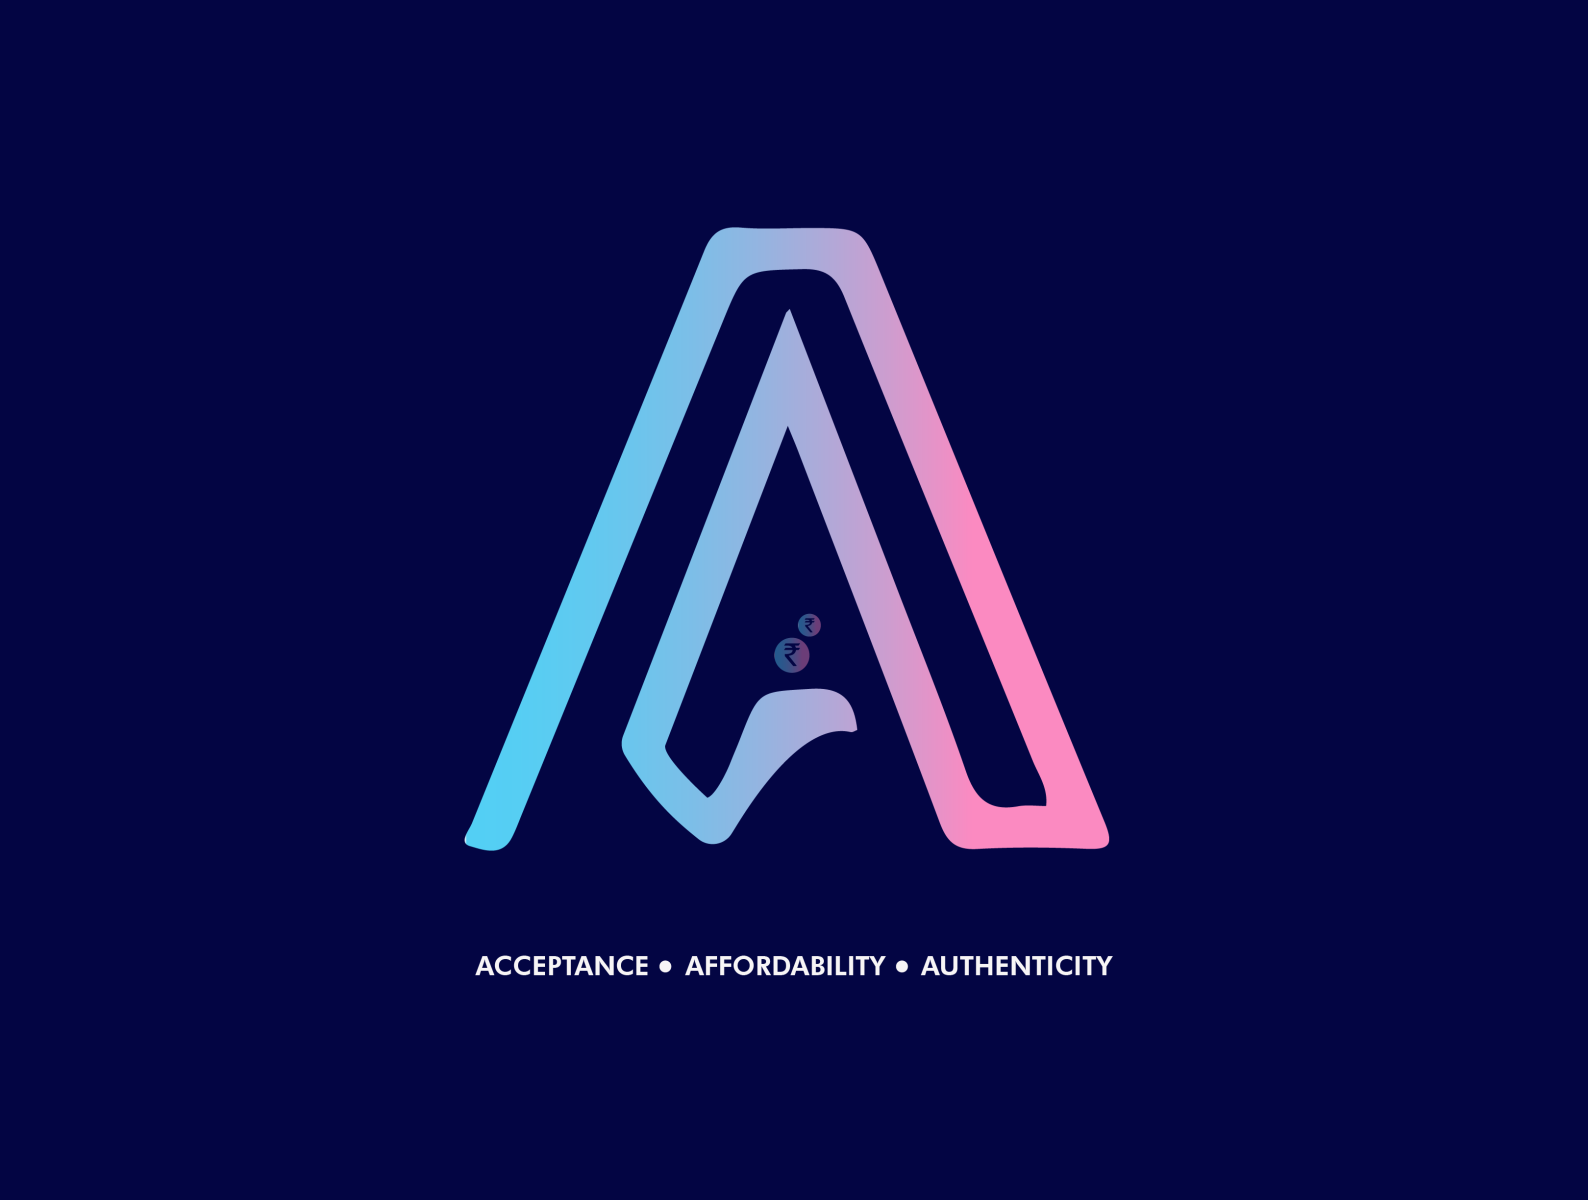 Dictionary 2021 - Letter 'A' by yukta dhiman on Dribbble